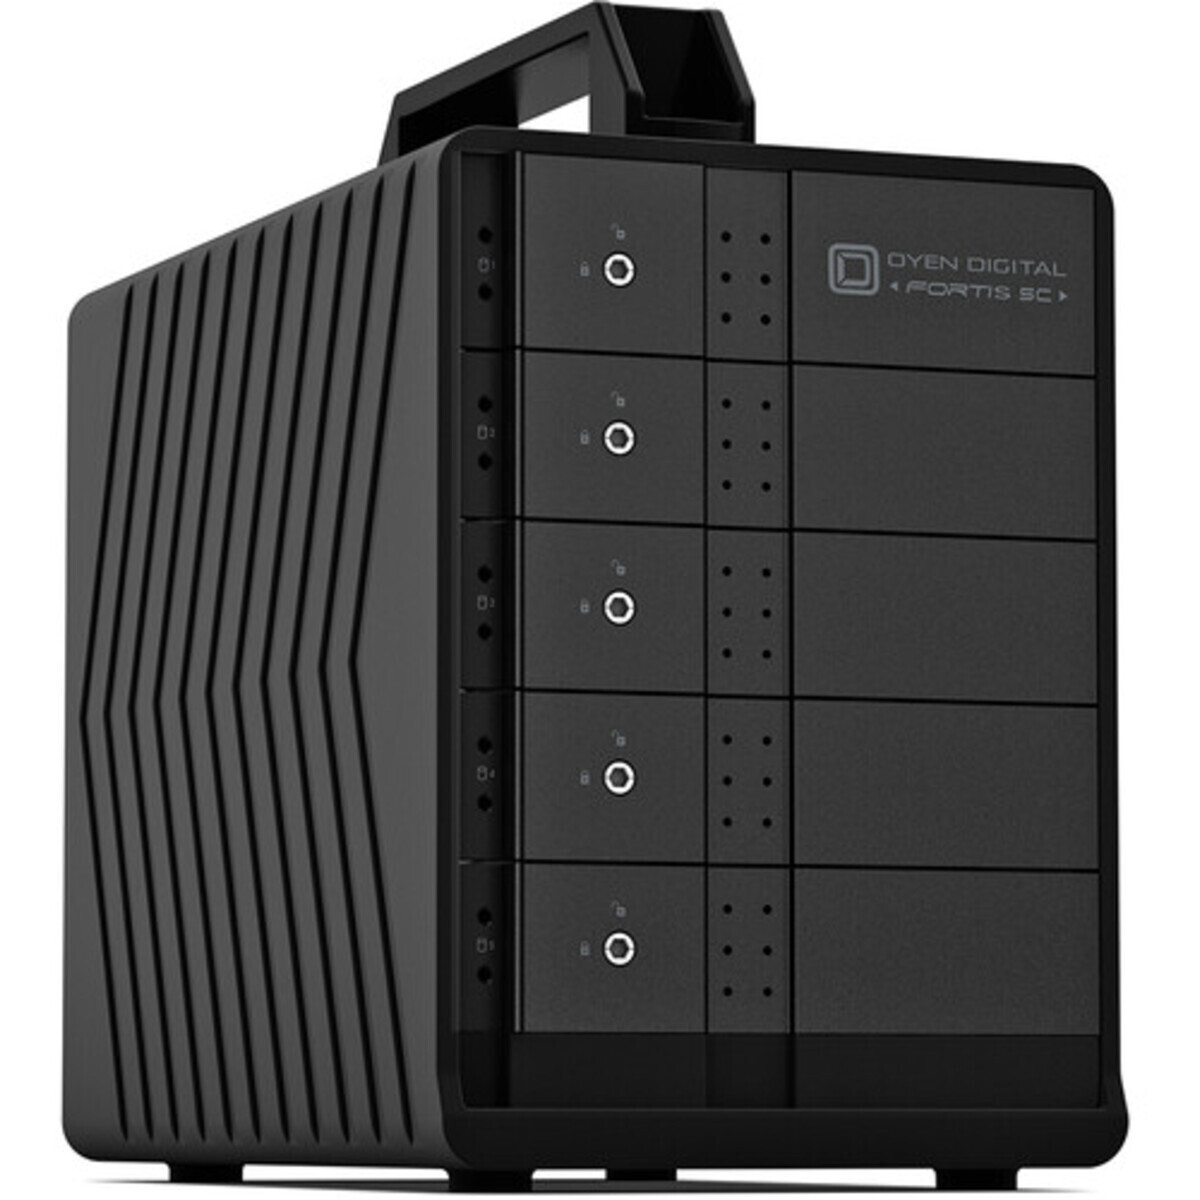 OYEN Fortis 5C 20tb 5-Bay Desktop Multimedia / Power User / Business DAS - Direct Attached Storage Device 5x4tb Western Digital Red Plus WD40EFPX 3.5 5400rpm SATA 6Gb/s HDD NAS Class Drives Installed - Burn-In Tested Fortis 5C